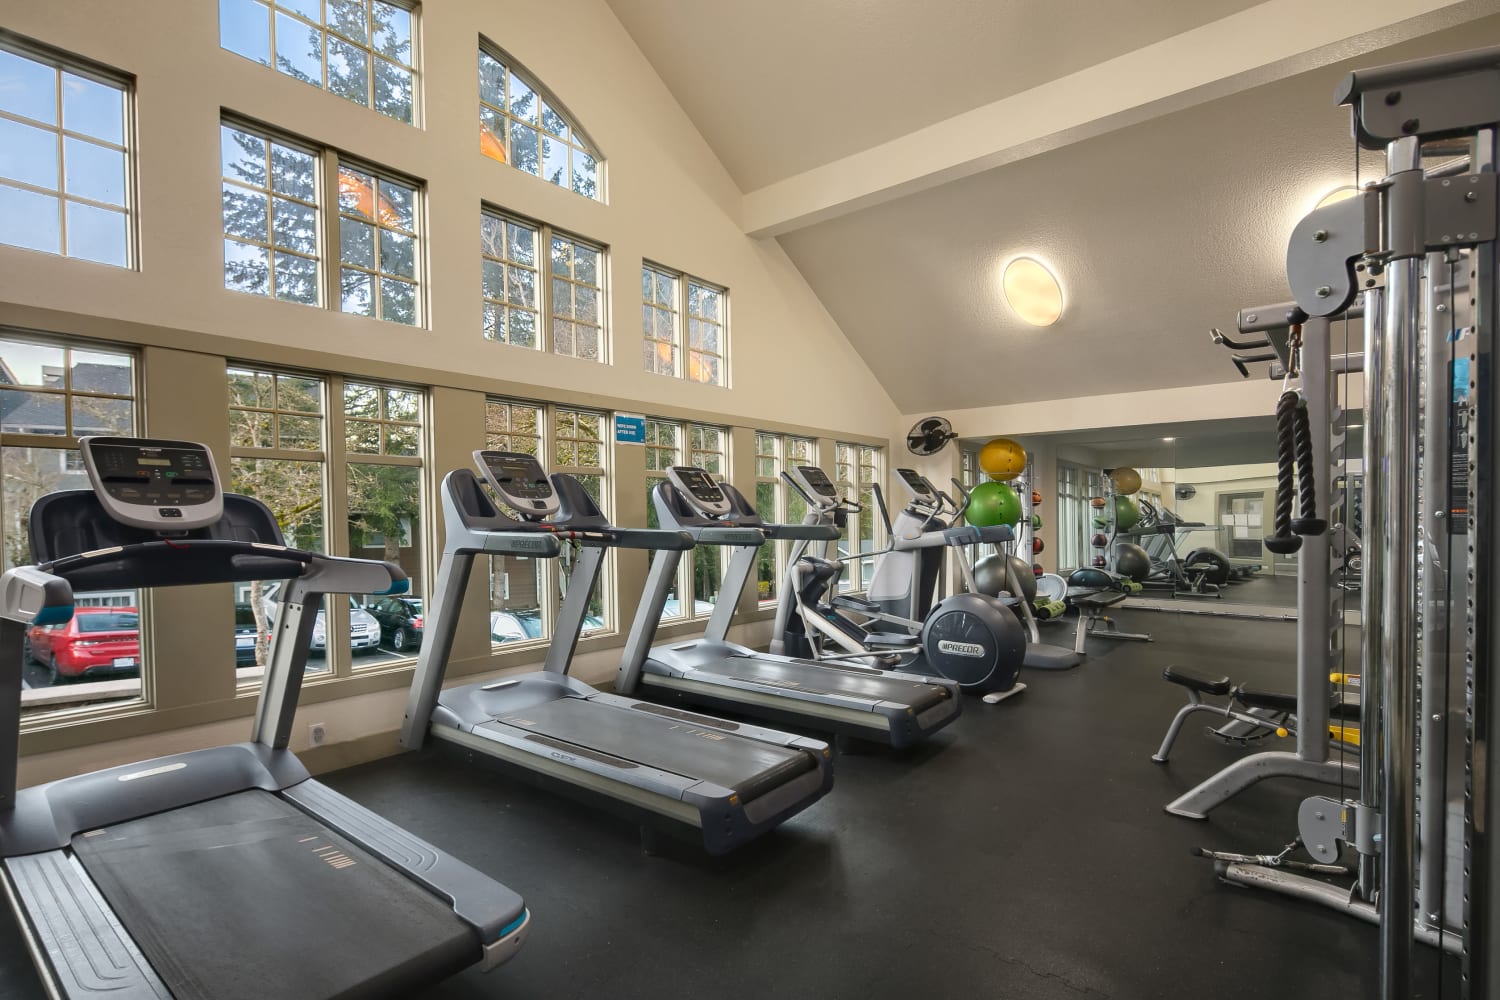 Treadmills in the community fitness center at Overlook at Lakemont in Bellevue, Washington